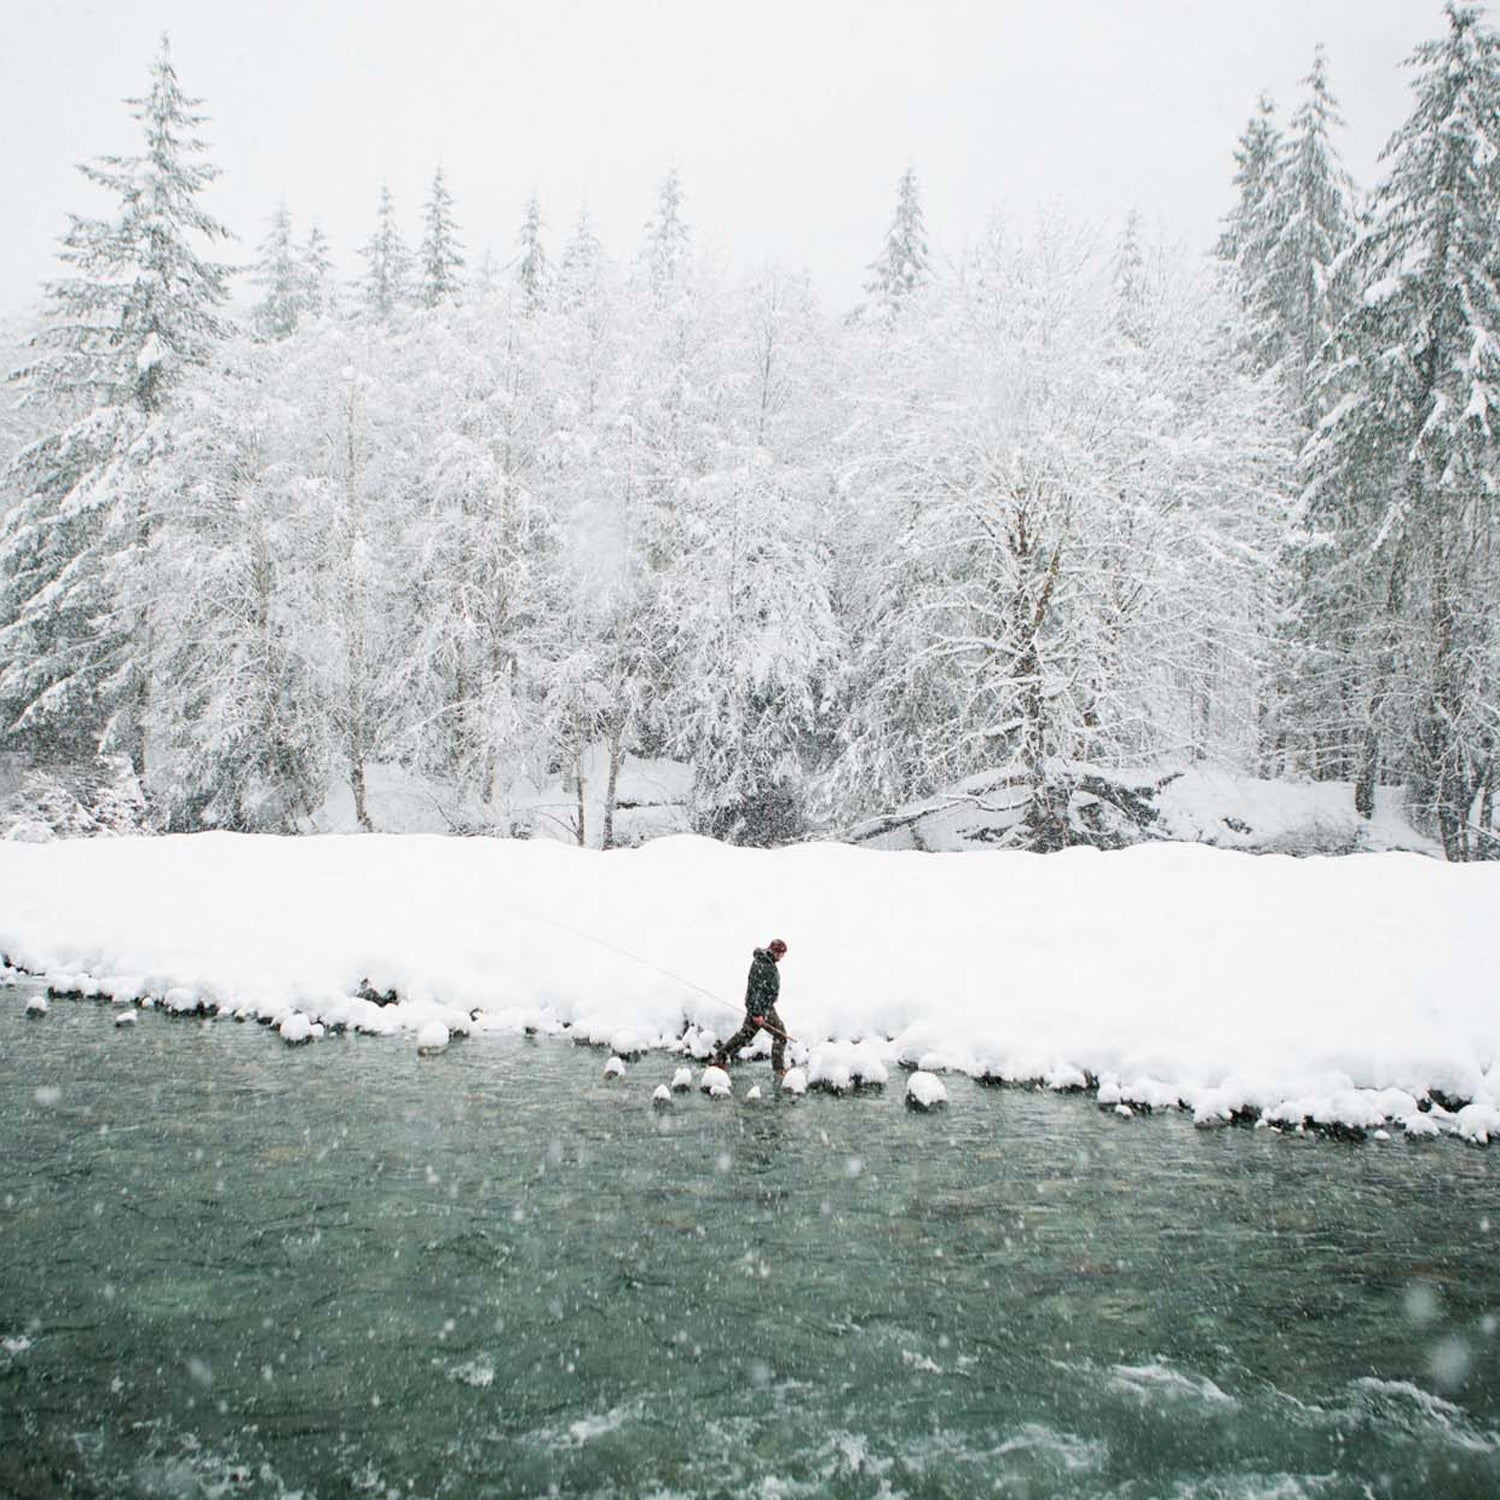 https://cdn.outsideonline.com/wp-content/uploads/migrated-images_parent/migrated-images_68/winter-snow-steelhead_s.jpg